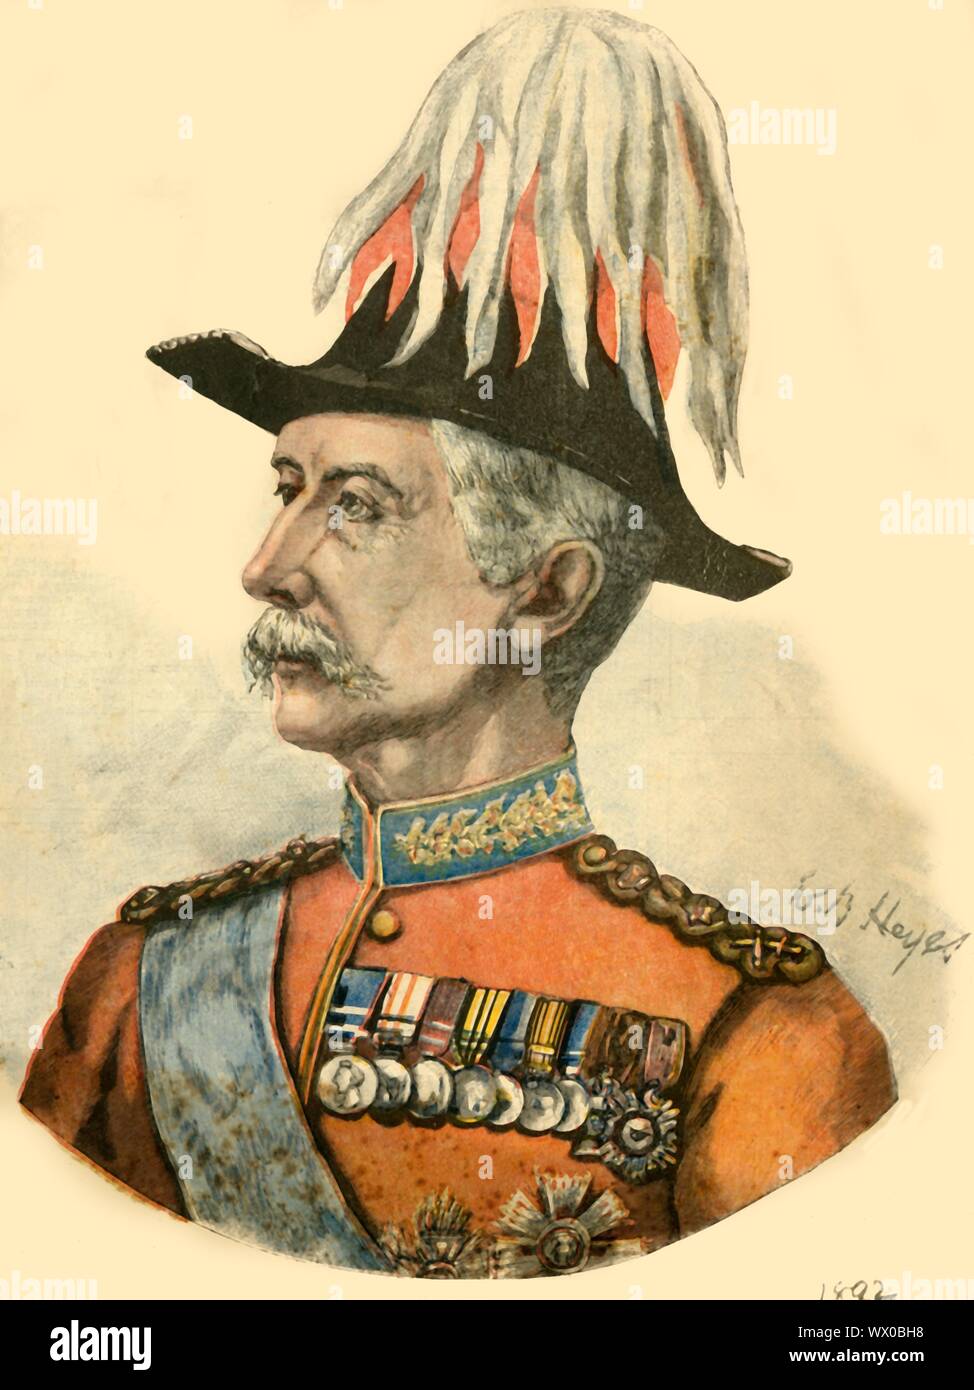 'General Right Hon. Viscount Wolseley, K.P.', 1892. Portrait of British Field Marshal Garnet Joseph Wolseley, 1st Viscount Wolseley. Irish-born Wolseley (1833-1913) served in Burma, the Crimean War, the suppression of the Indian Sepoy Rebellion, in China, Canada, and widely in Africa. In 1885 Wolseley arrived at Khartoum too late to relieve General Gordon. He served as Commander-in-Chief of the British Army from 1890-1895. Stock Photo